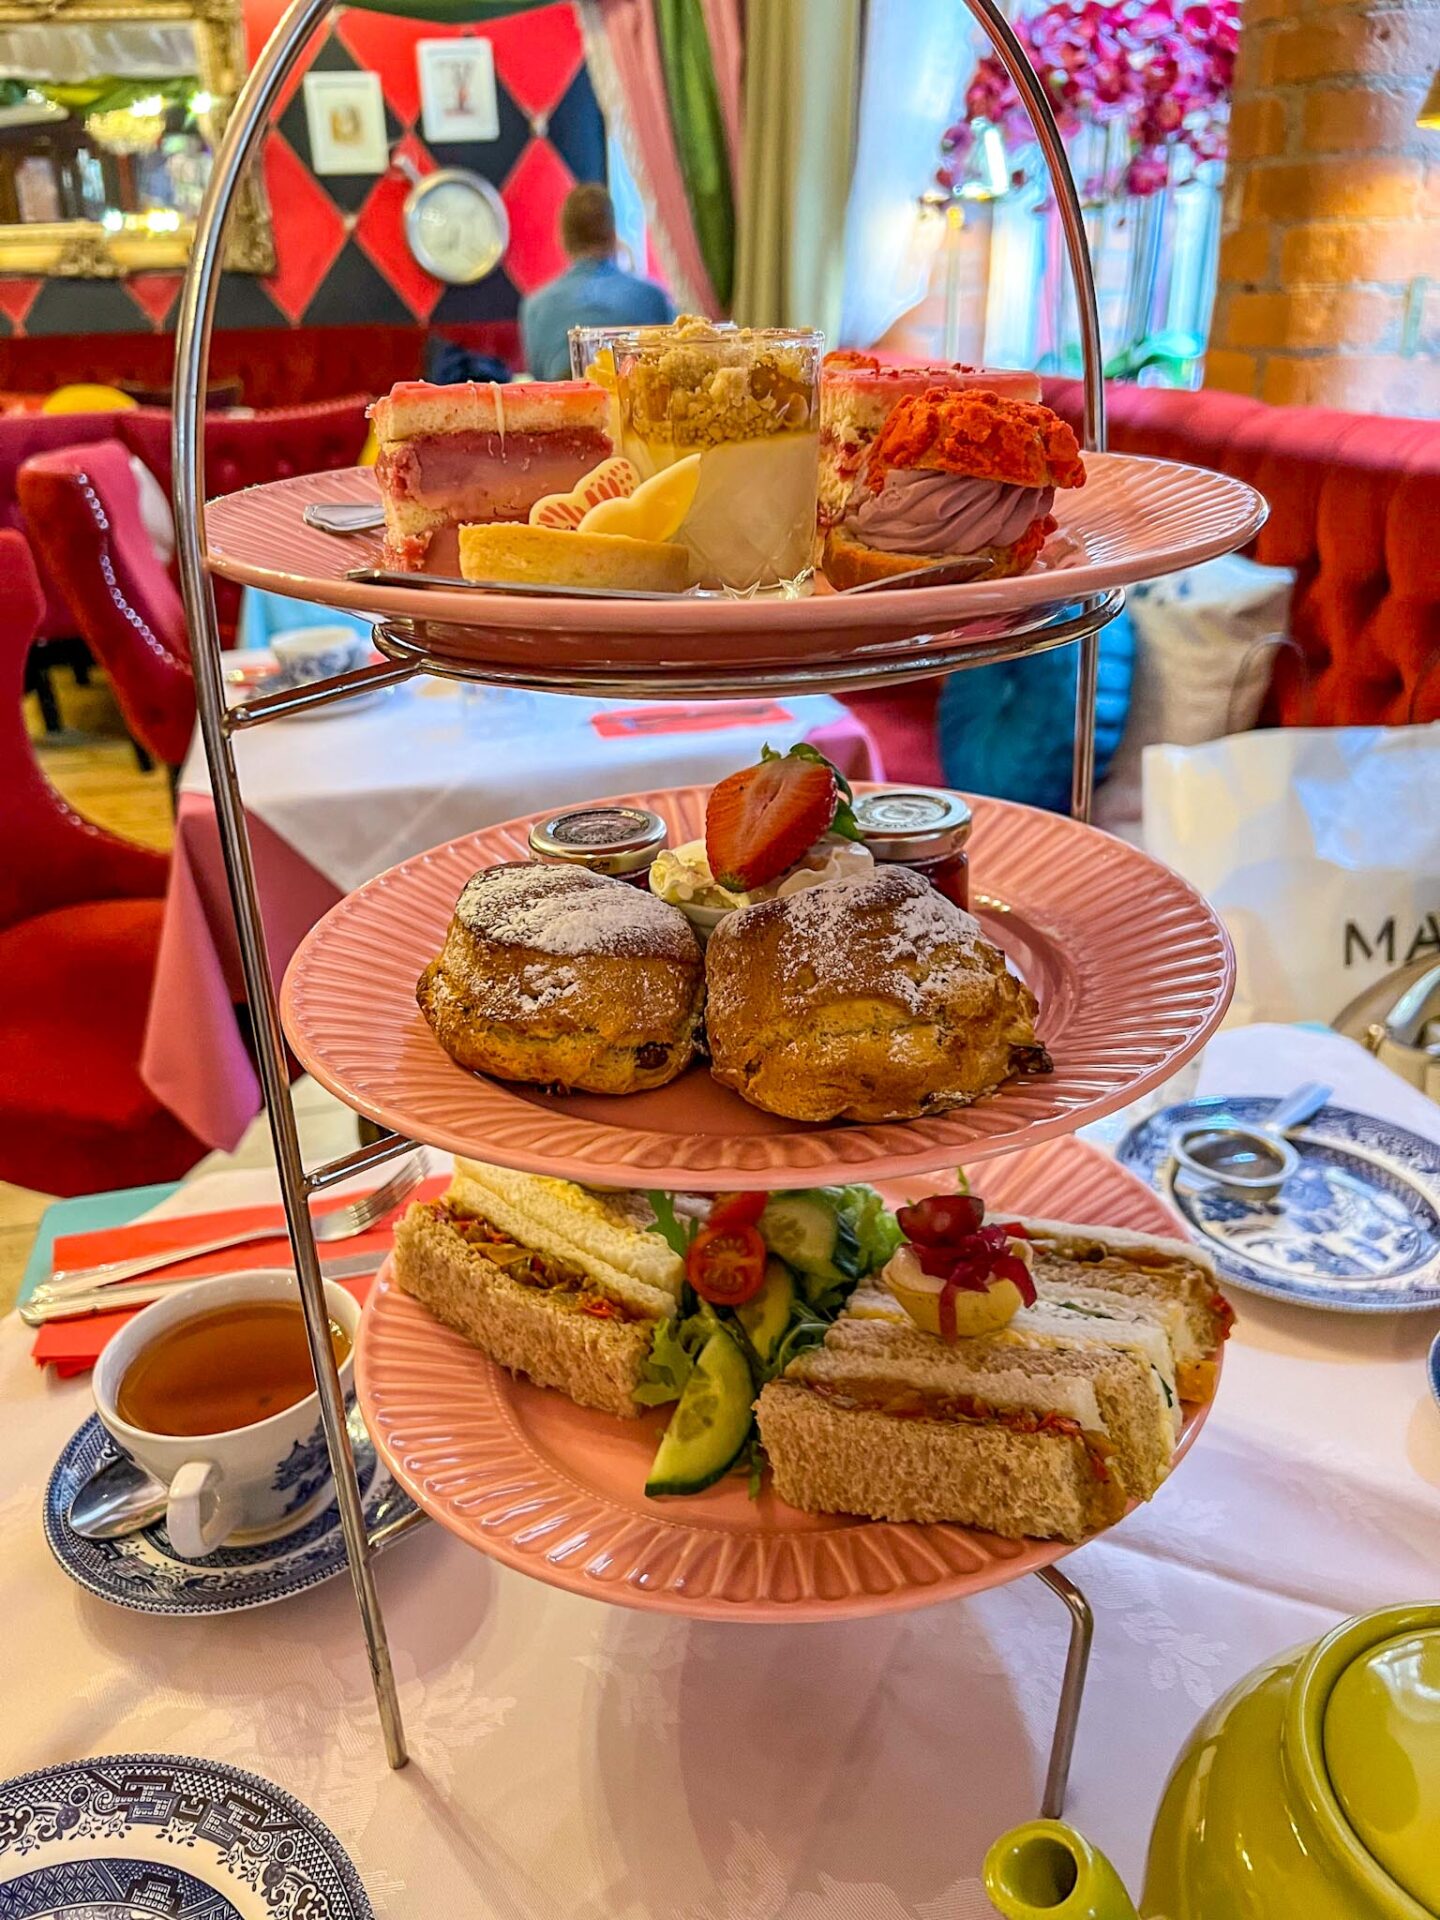 Things to do in manchester in the rain, afternoon tea from Richmond Tea Rooms in Manchester